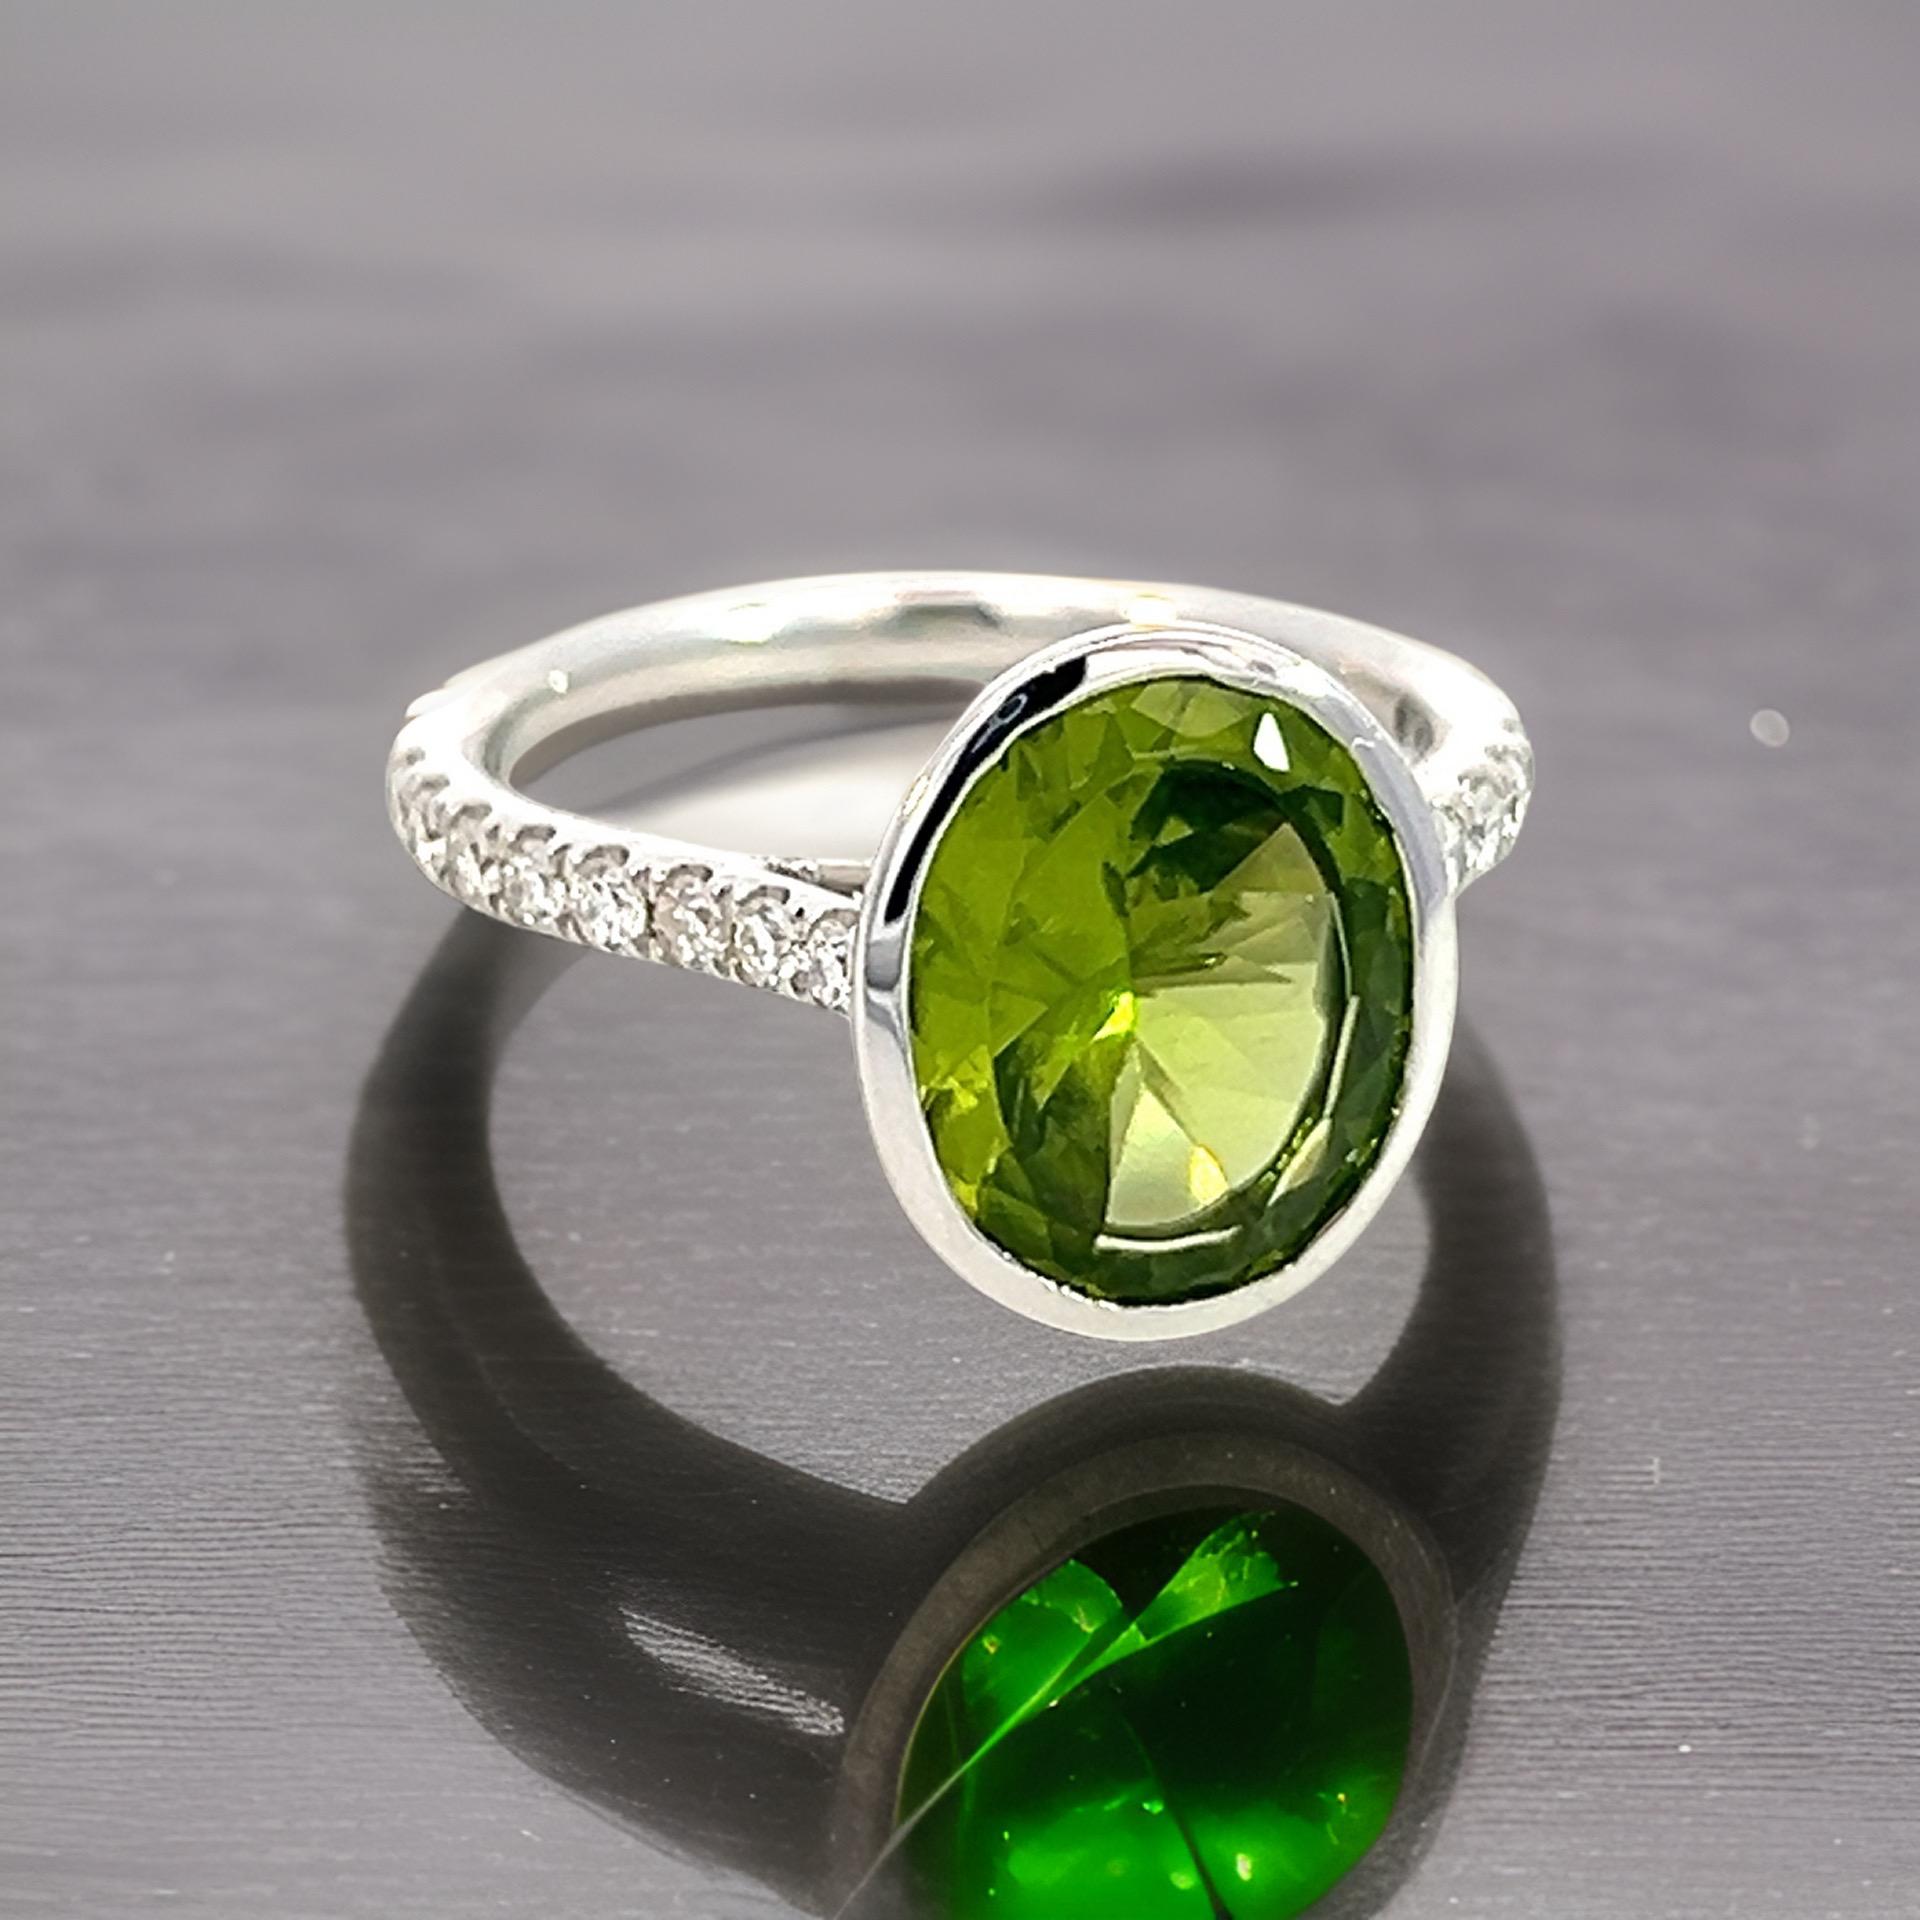 Natural Peridot Diamond Ring 6.5 14k W Gold 3.49 TCW Certified For Sale 6